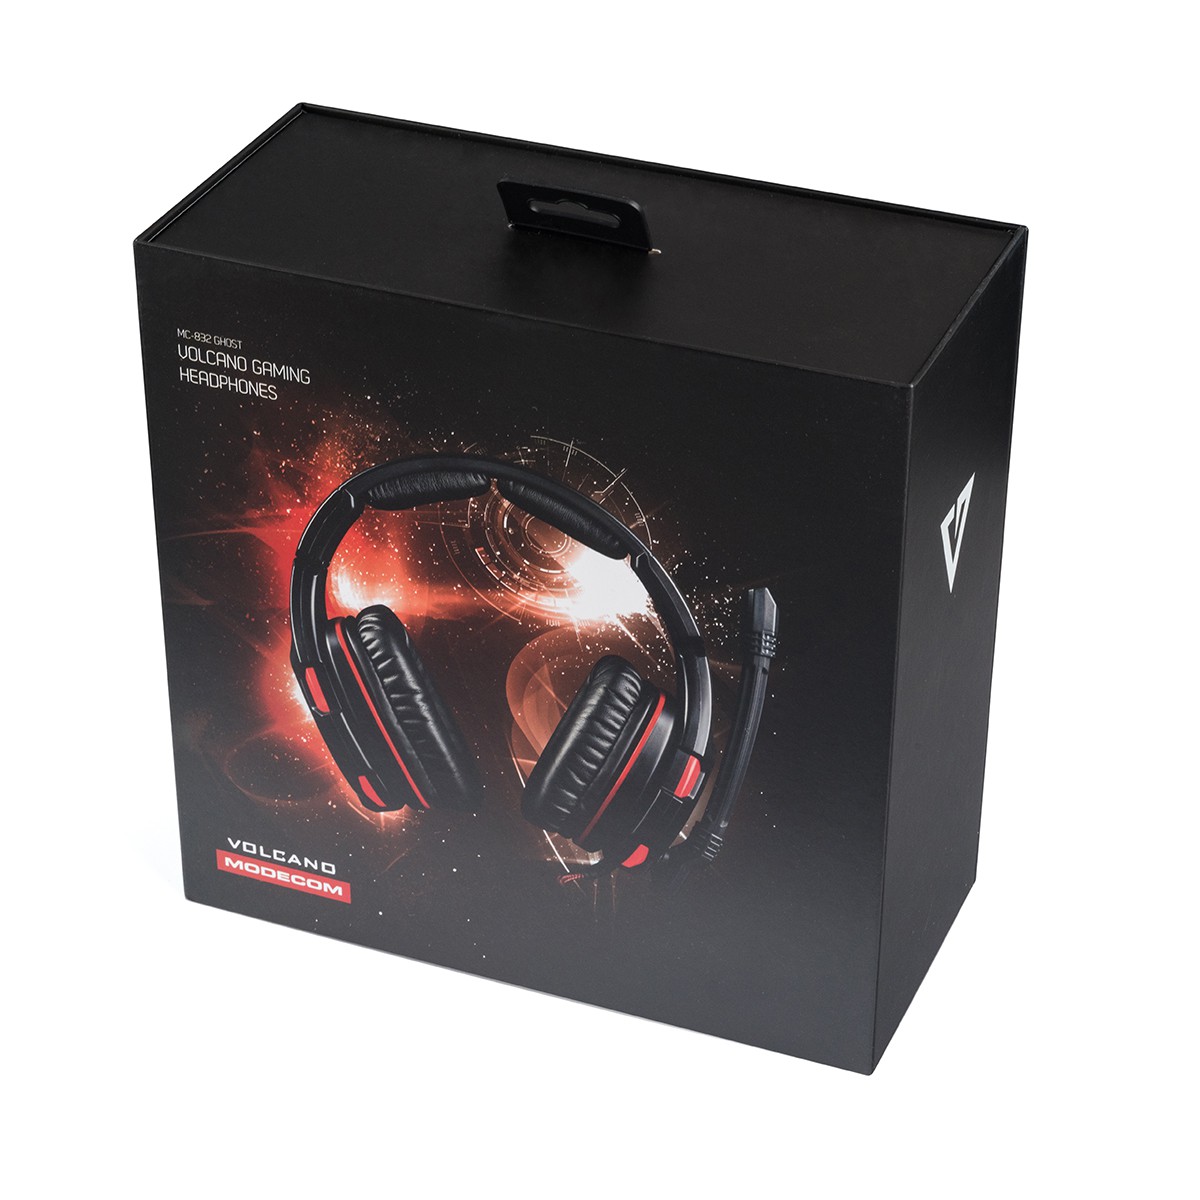 MODECOM MC-832 GHOST wired gaming headphones 7.1